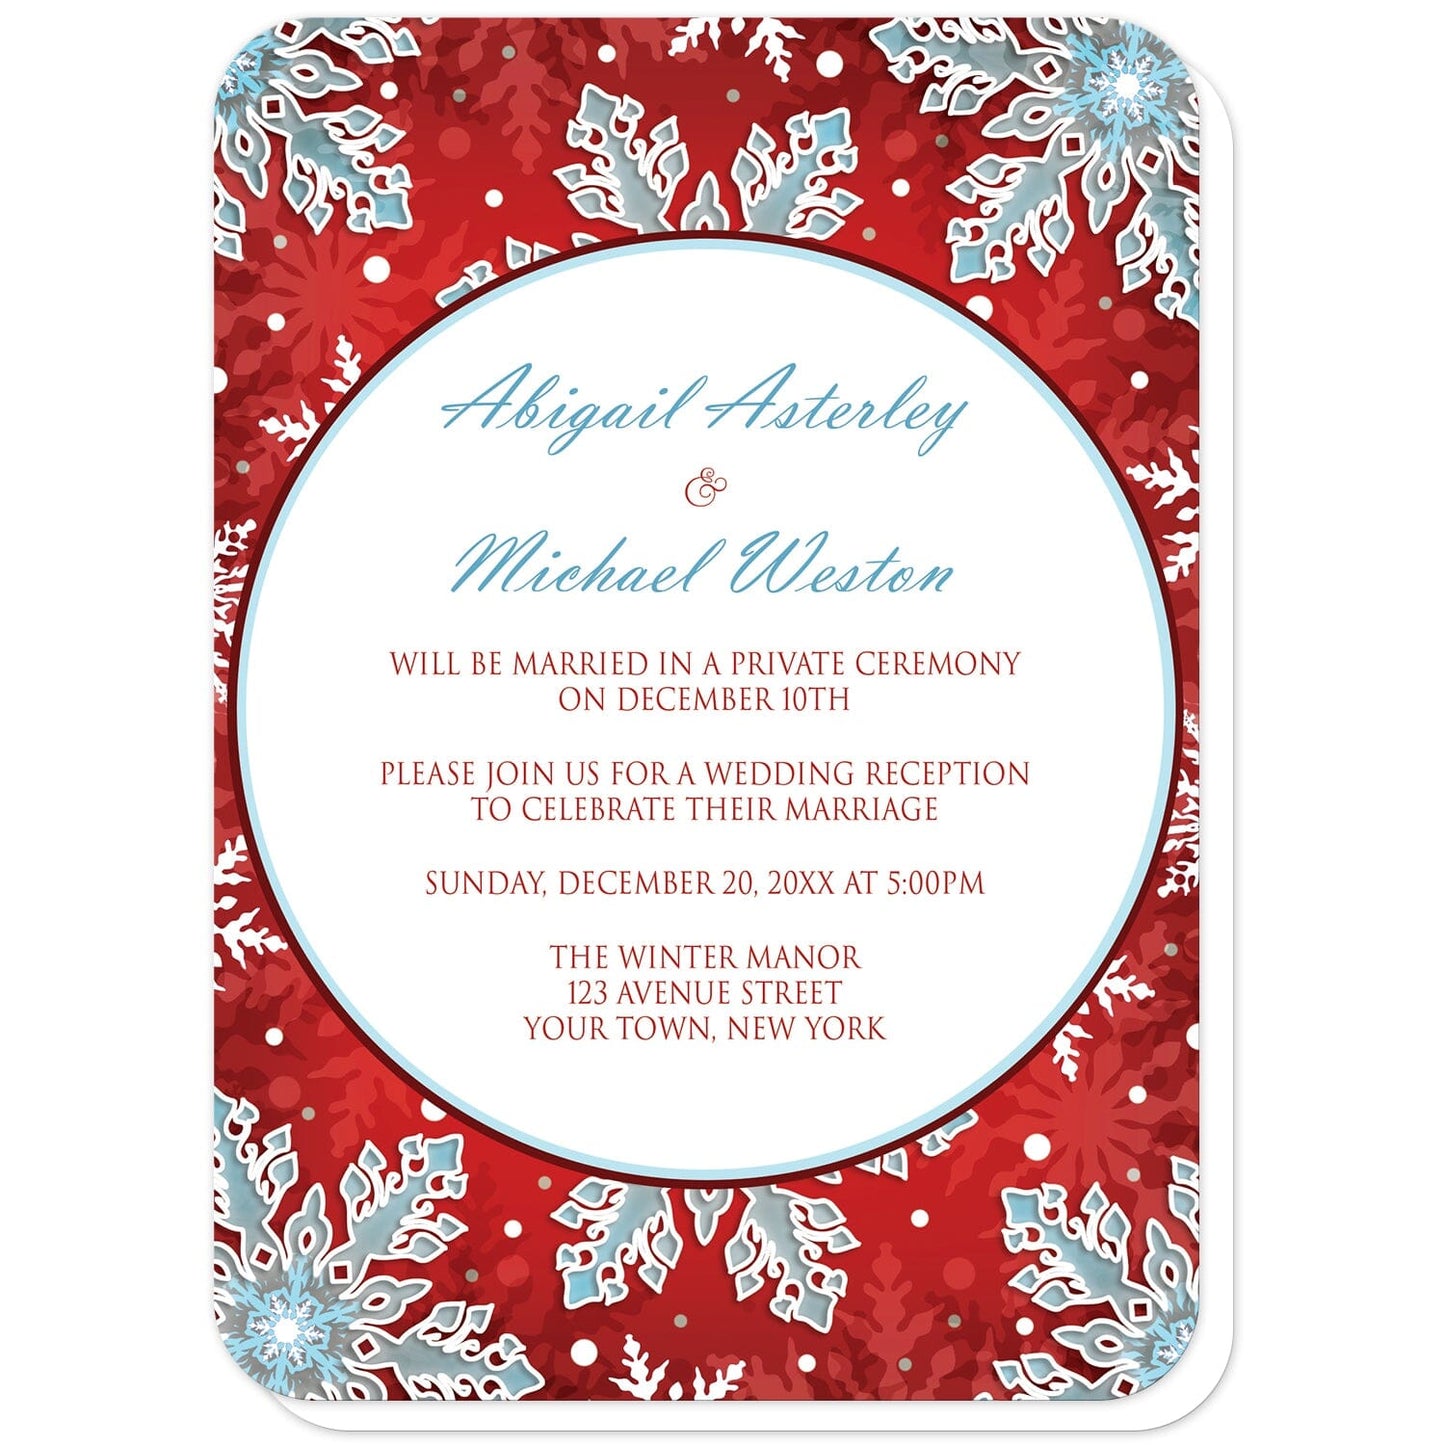 Modern Red White Blue Snowflake Reception Only Invitations (with rounded corners) at Artistically Invited. Modern red white blue snowflake reception only invitations with your personalized post-wedding reception details custom printed in blue and purple in a white circle over a royal red background covered in ornate white and blue snowflakes.